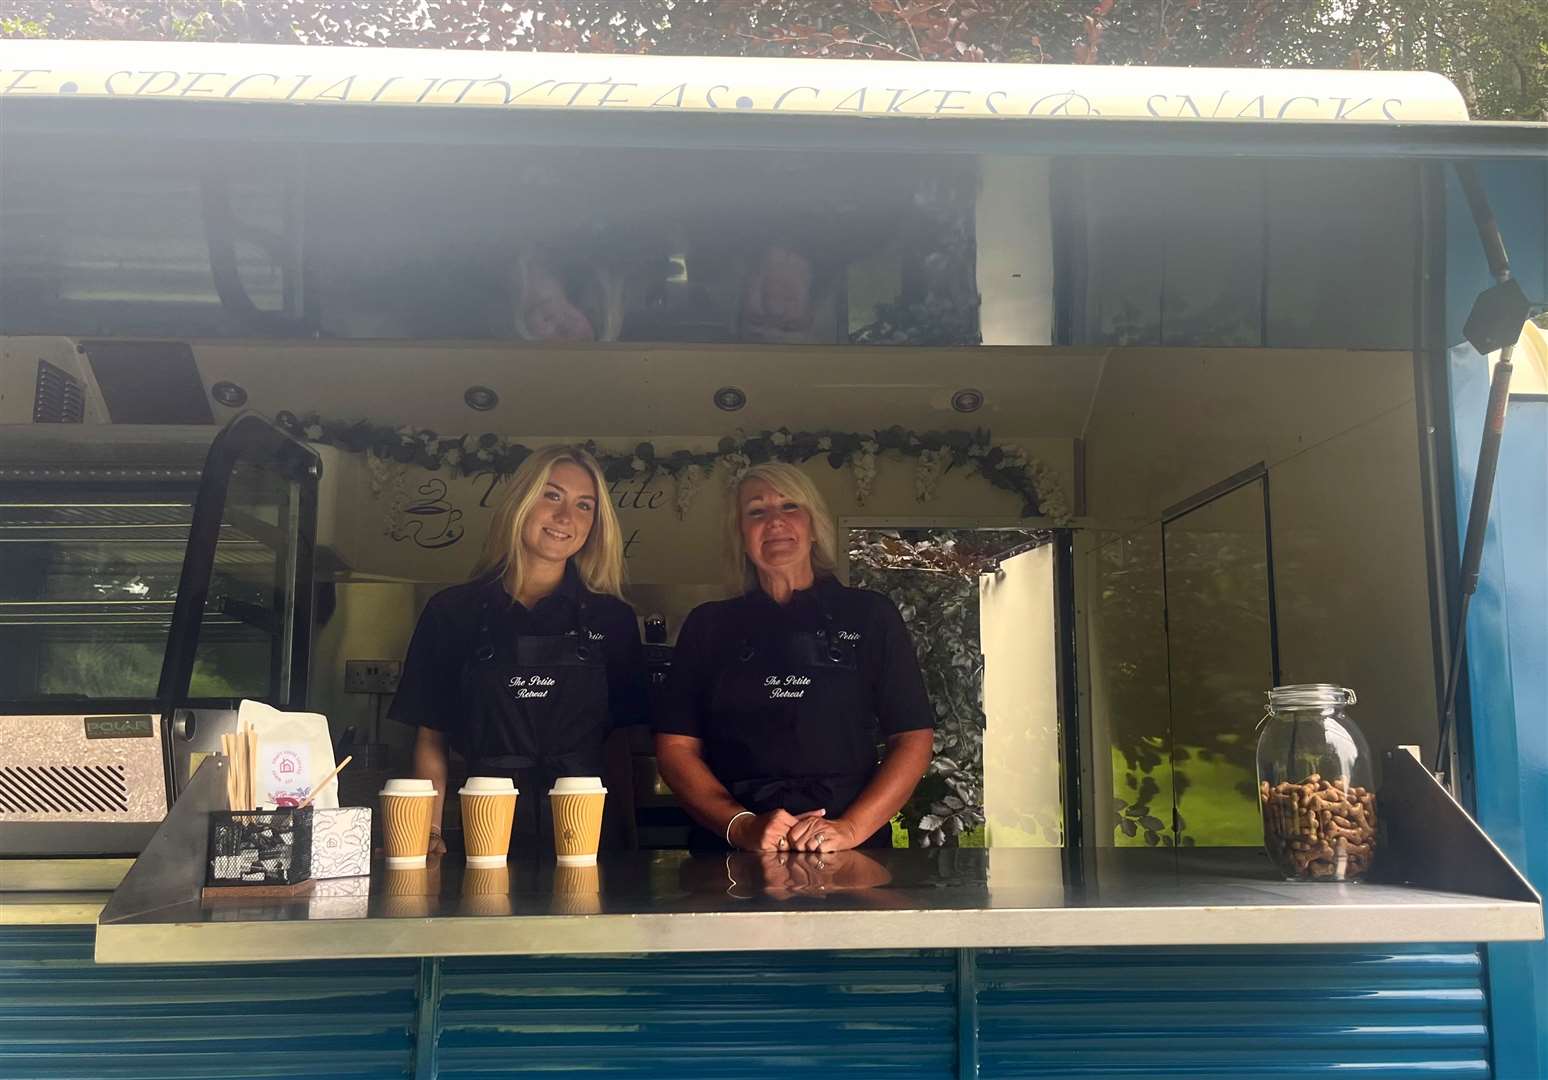 Ceri and Ashleigh will be serving customers at the Bearsted Woodland Trust